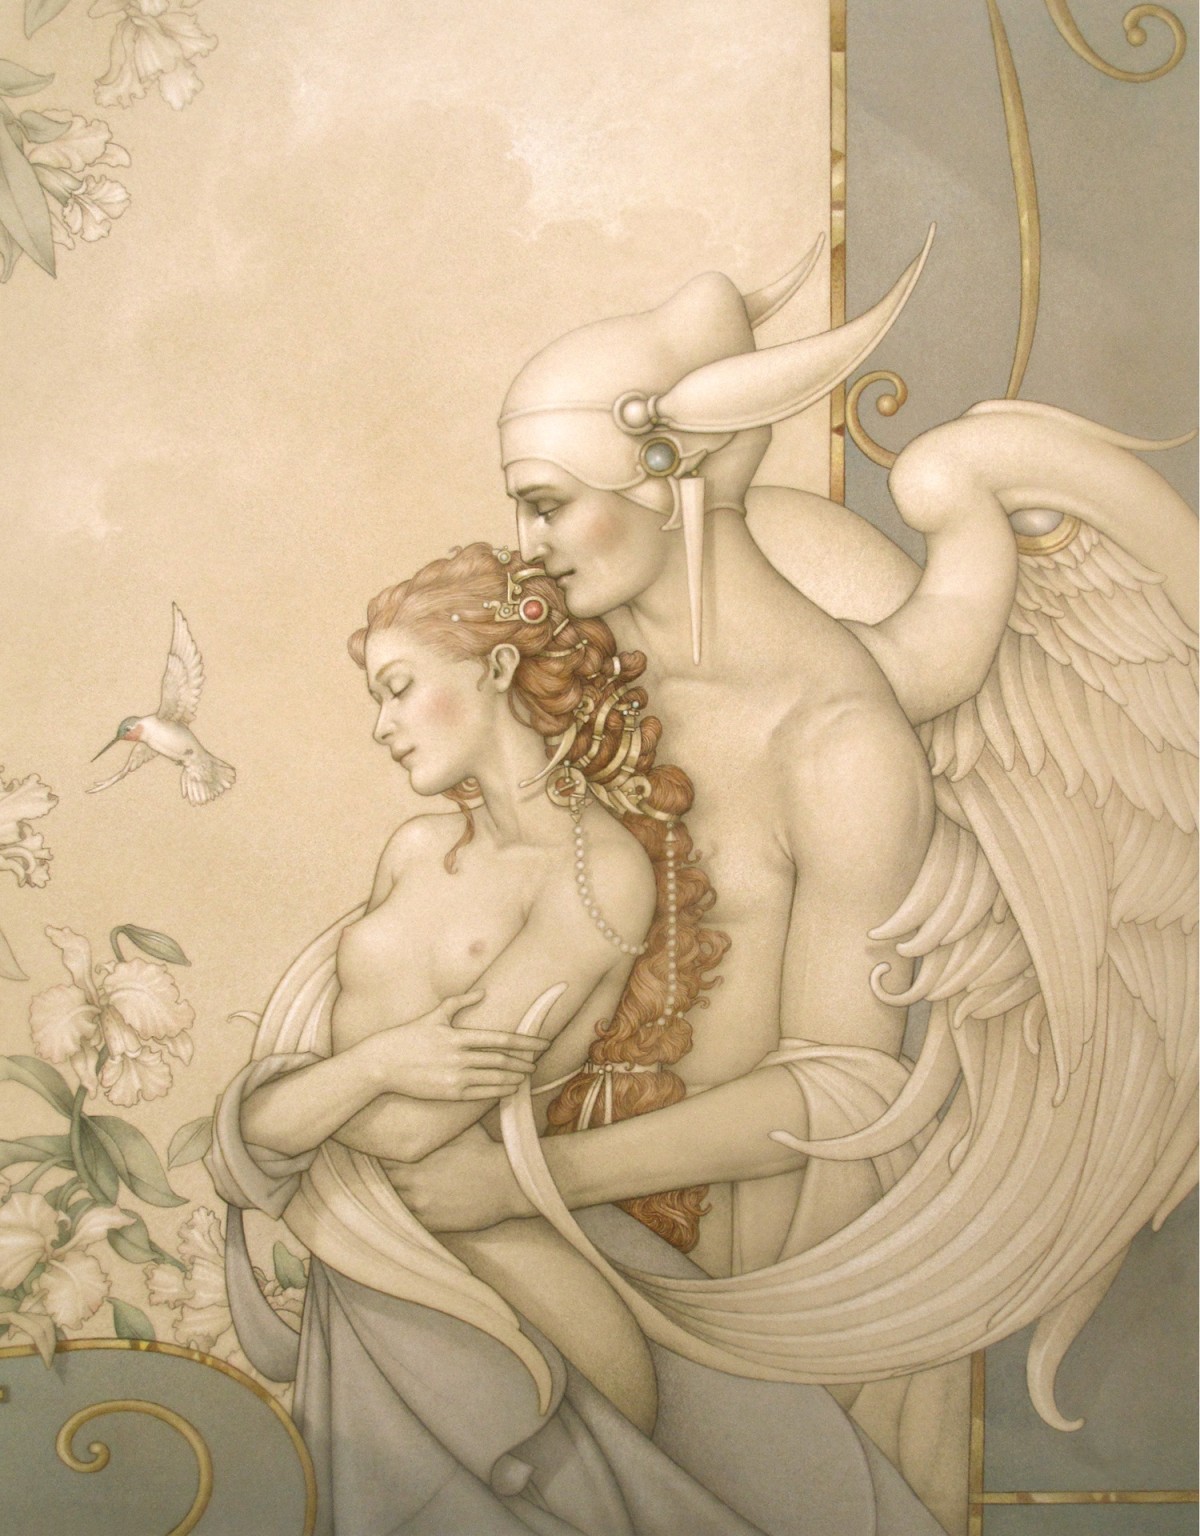 "There Must Be an Angel" Fine Art Edition on Paper by Michael Parkes